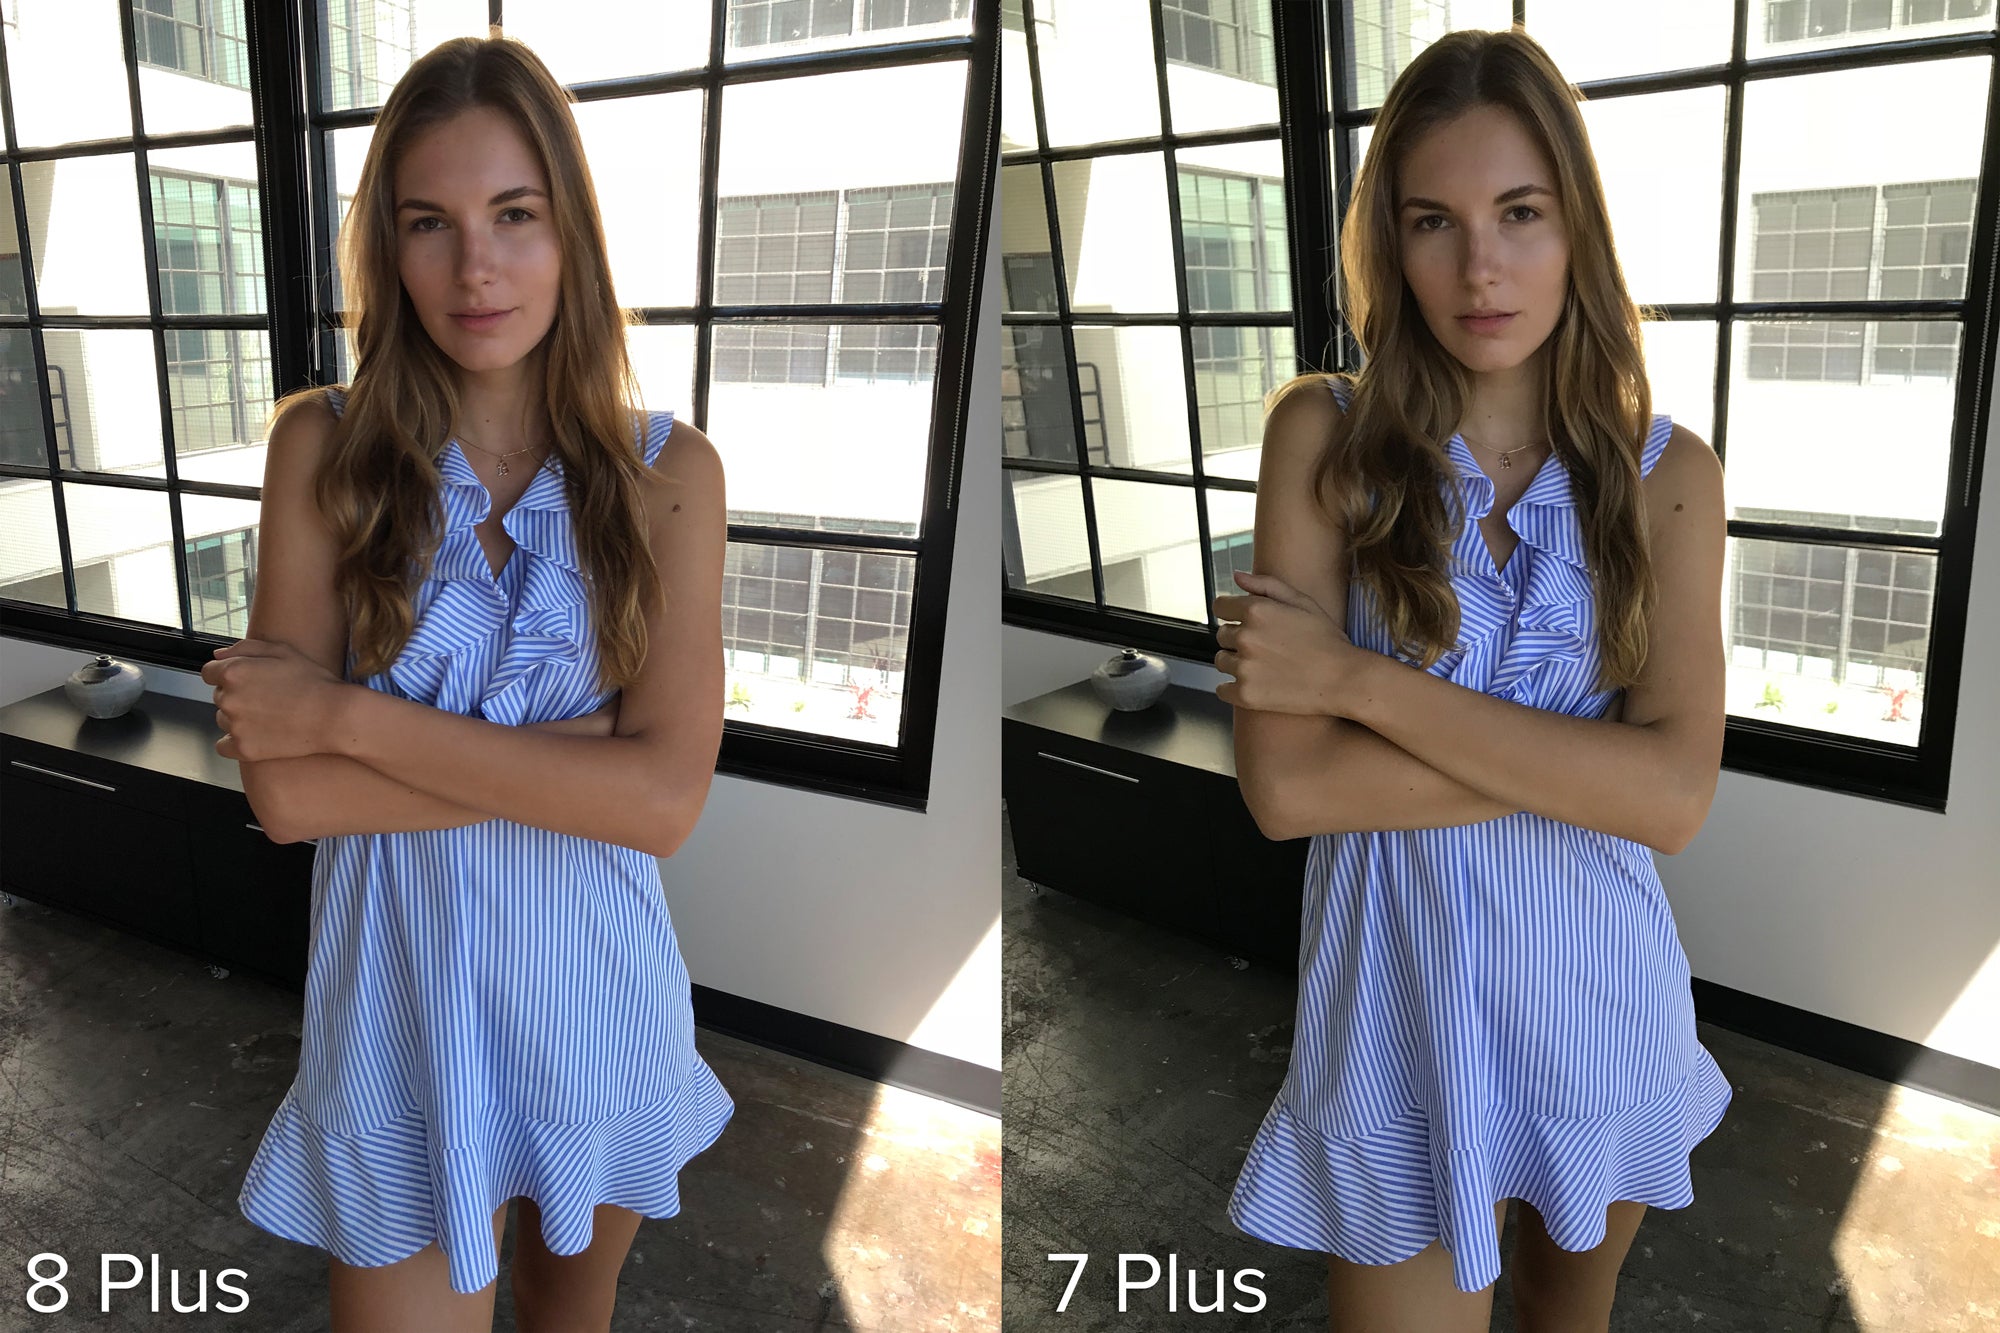 iPhone 8 Plus camera test Is it worth the upgrade from iPhone 7 Plus